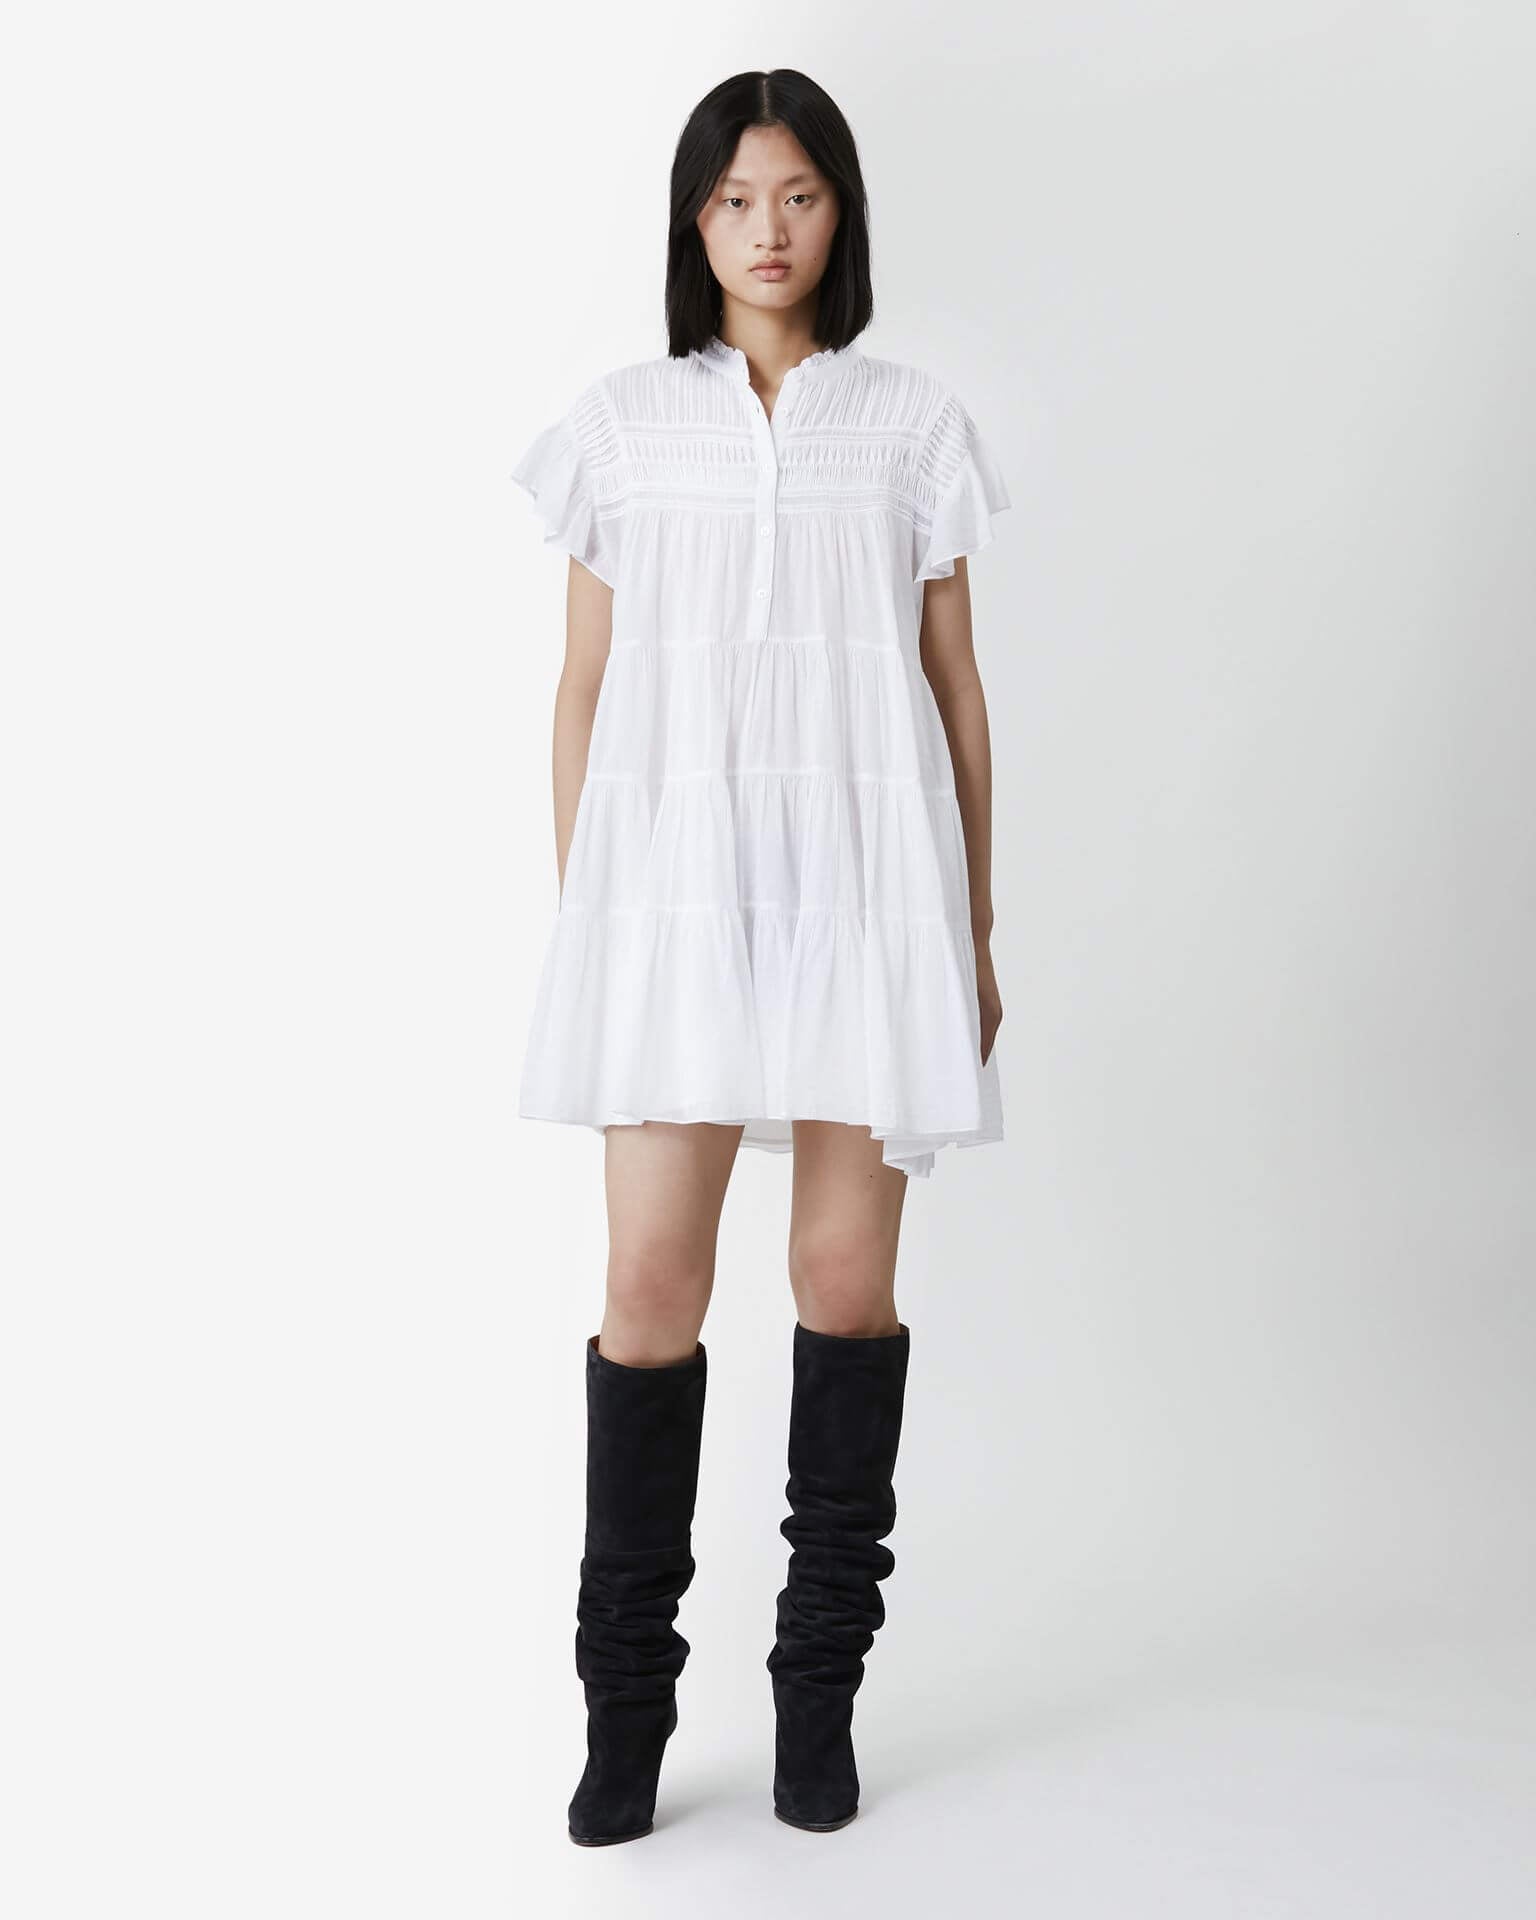 Isabel Marant Etoile Laniyake Dress in White available at TNT The New Trend Australia. Free shipping on orders over $300 AUD.